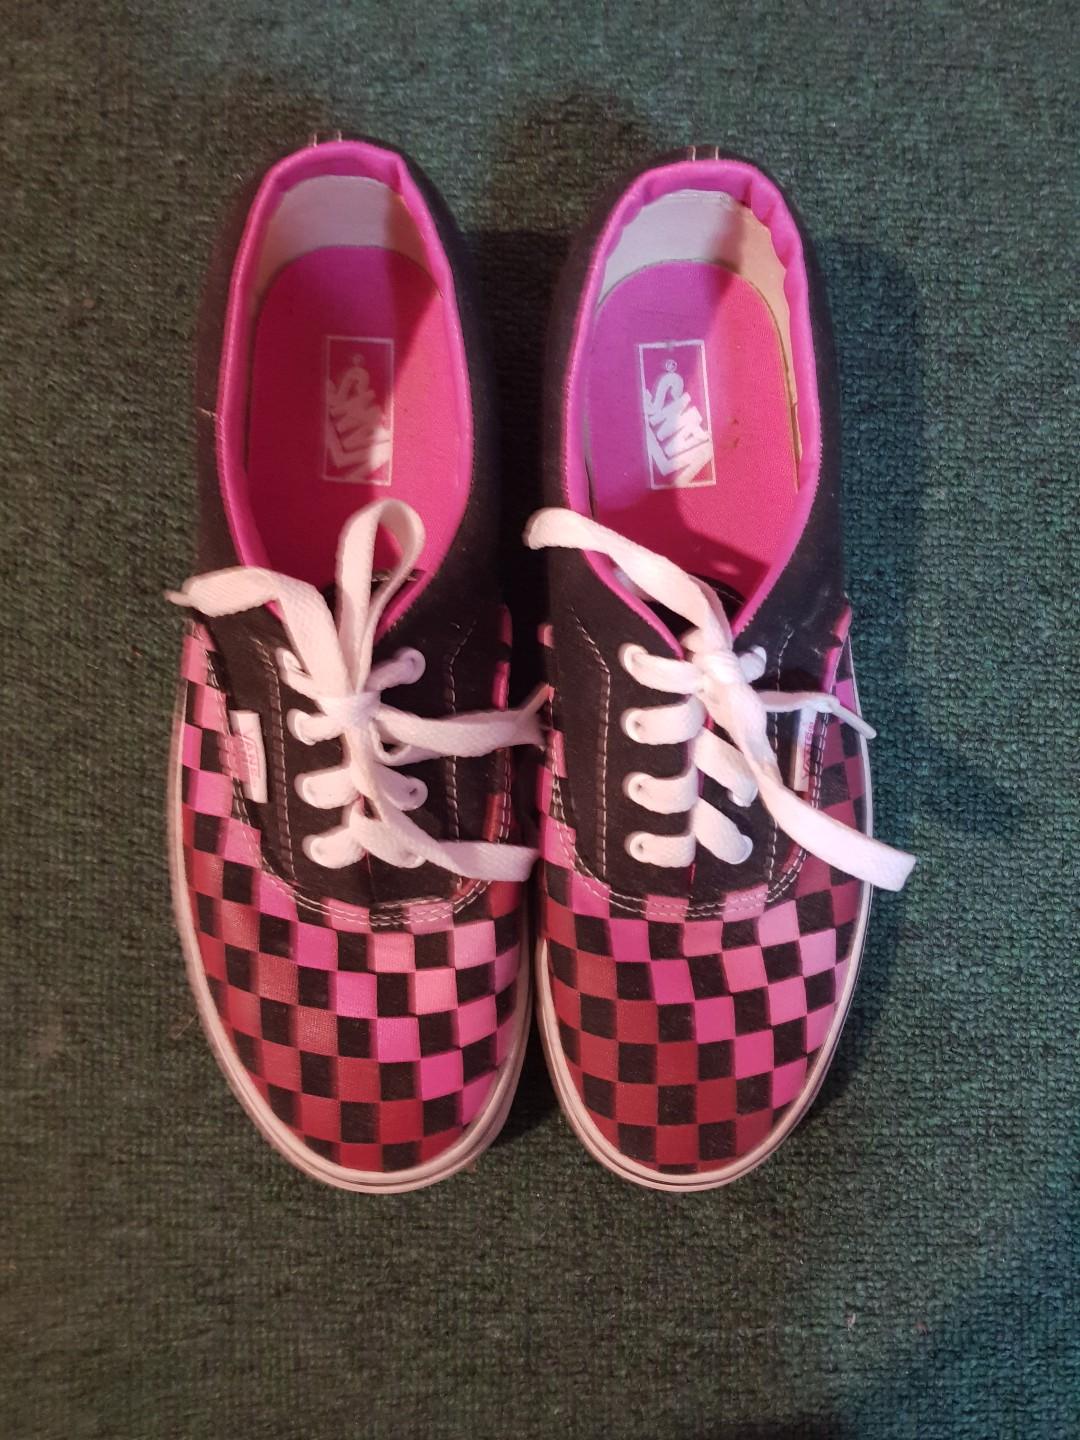 black vans with pink checkered